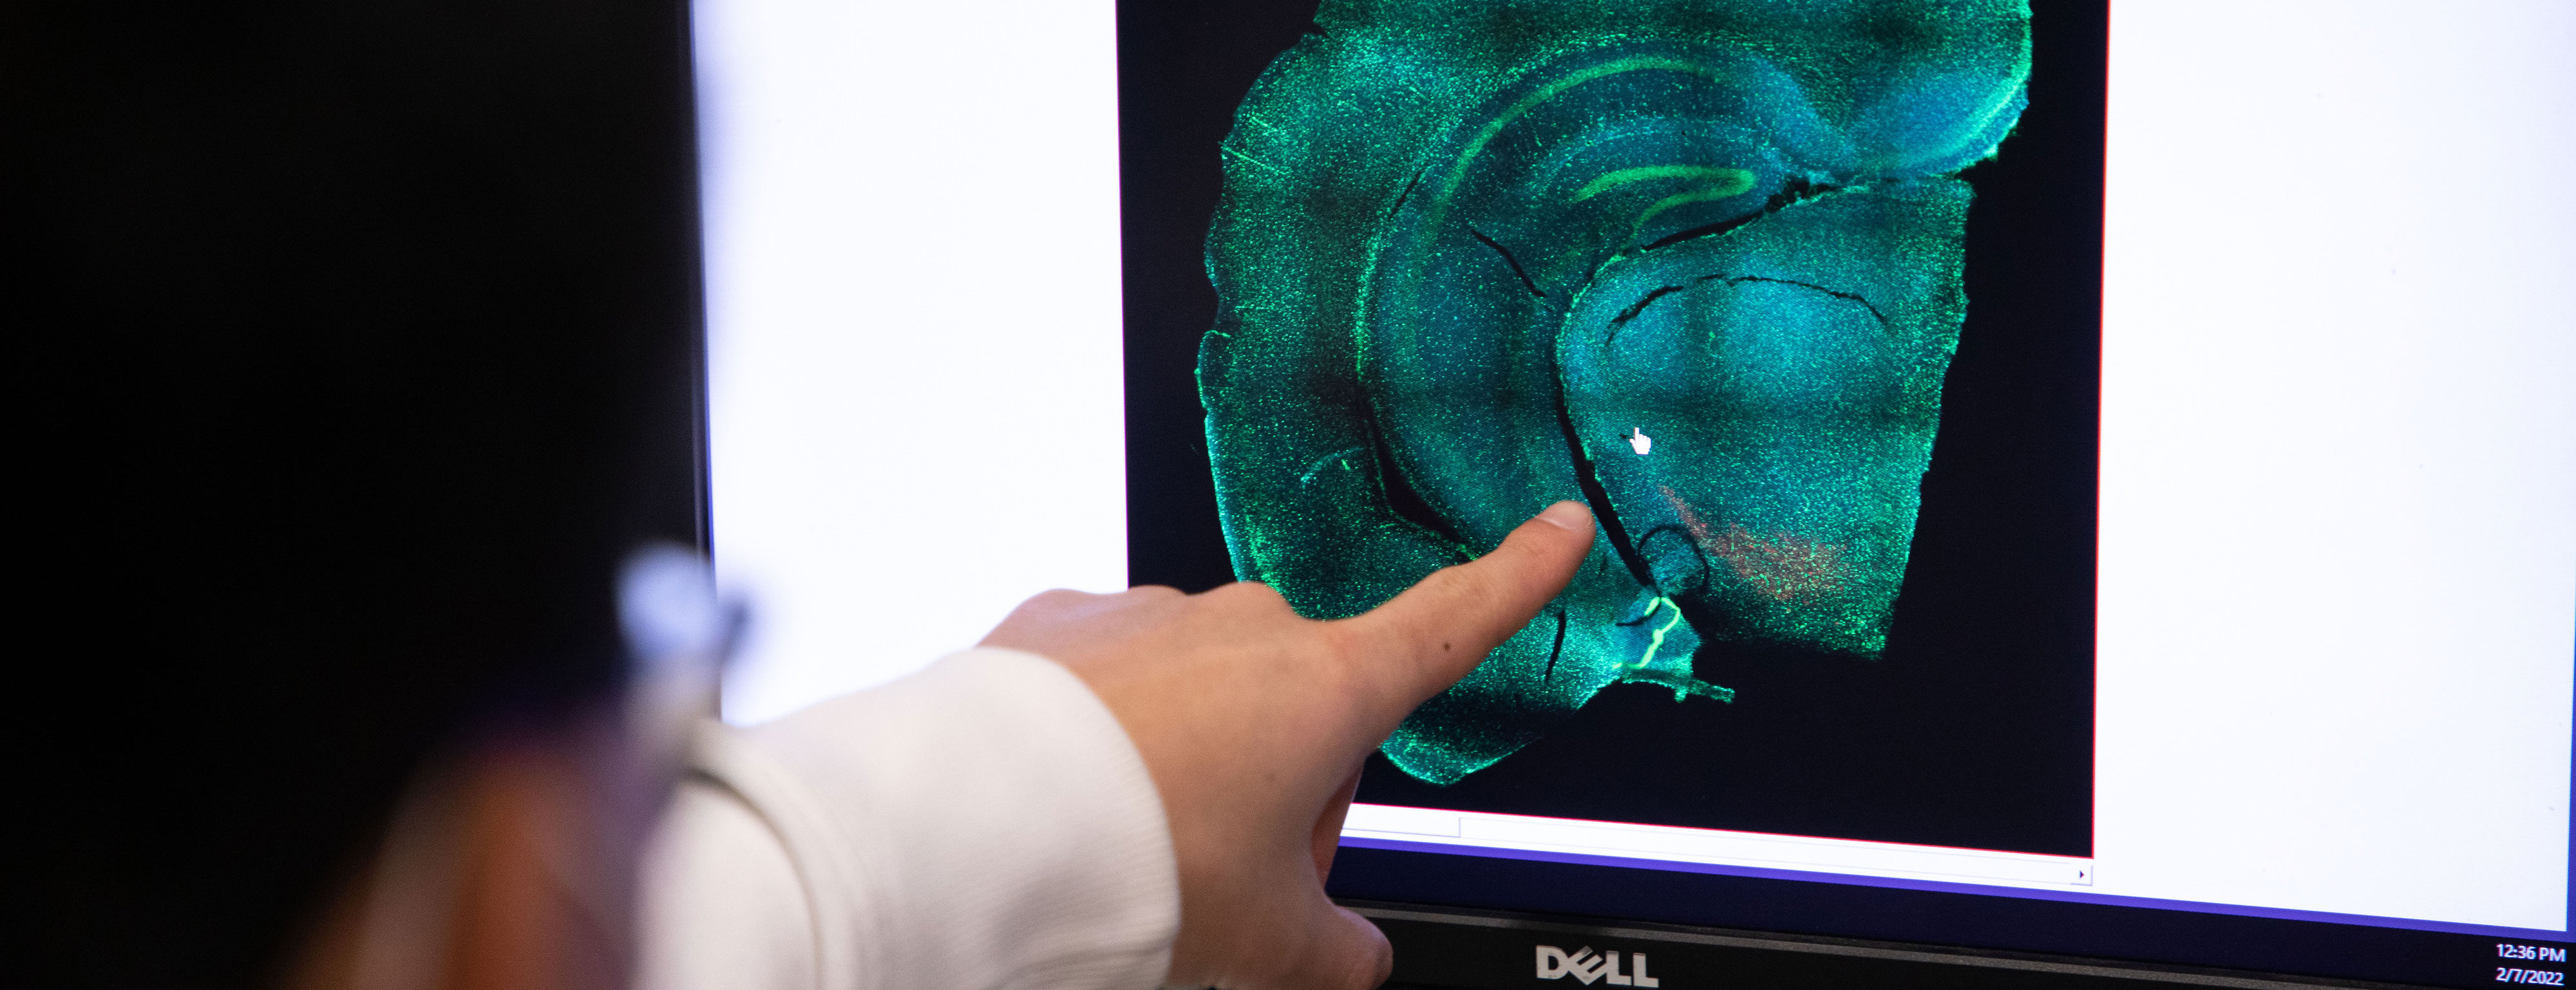 A researcher points to an area on a scan of a human brain shown on a computer screen.